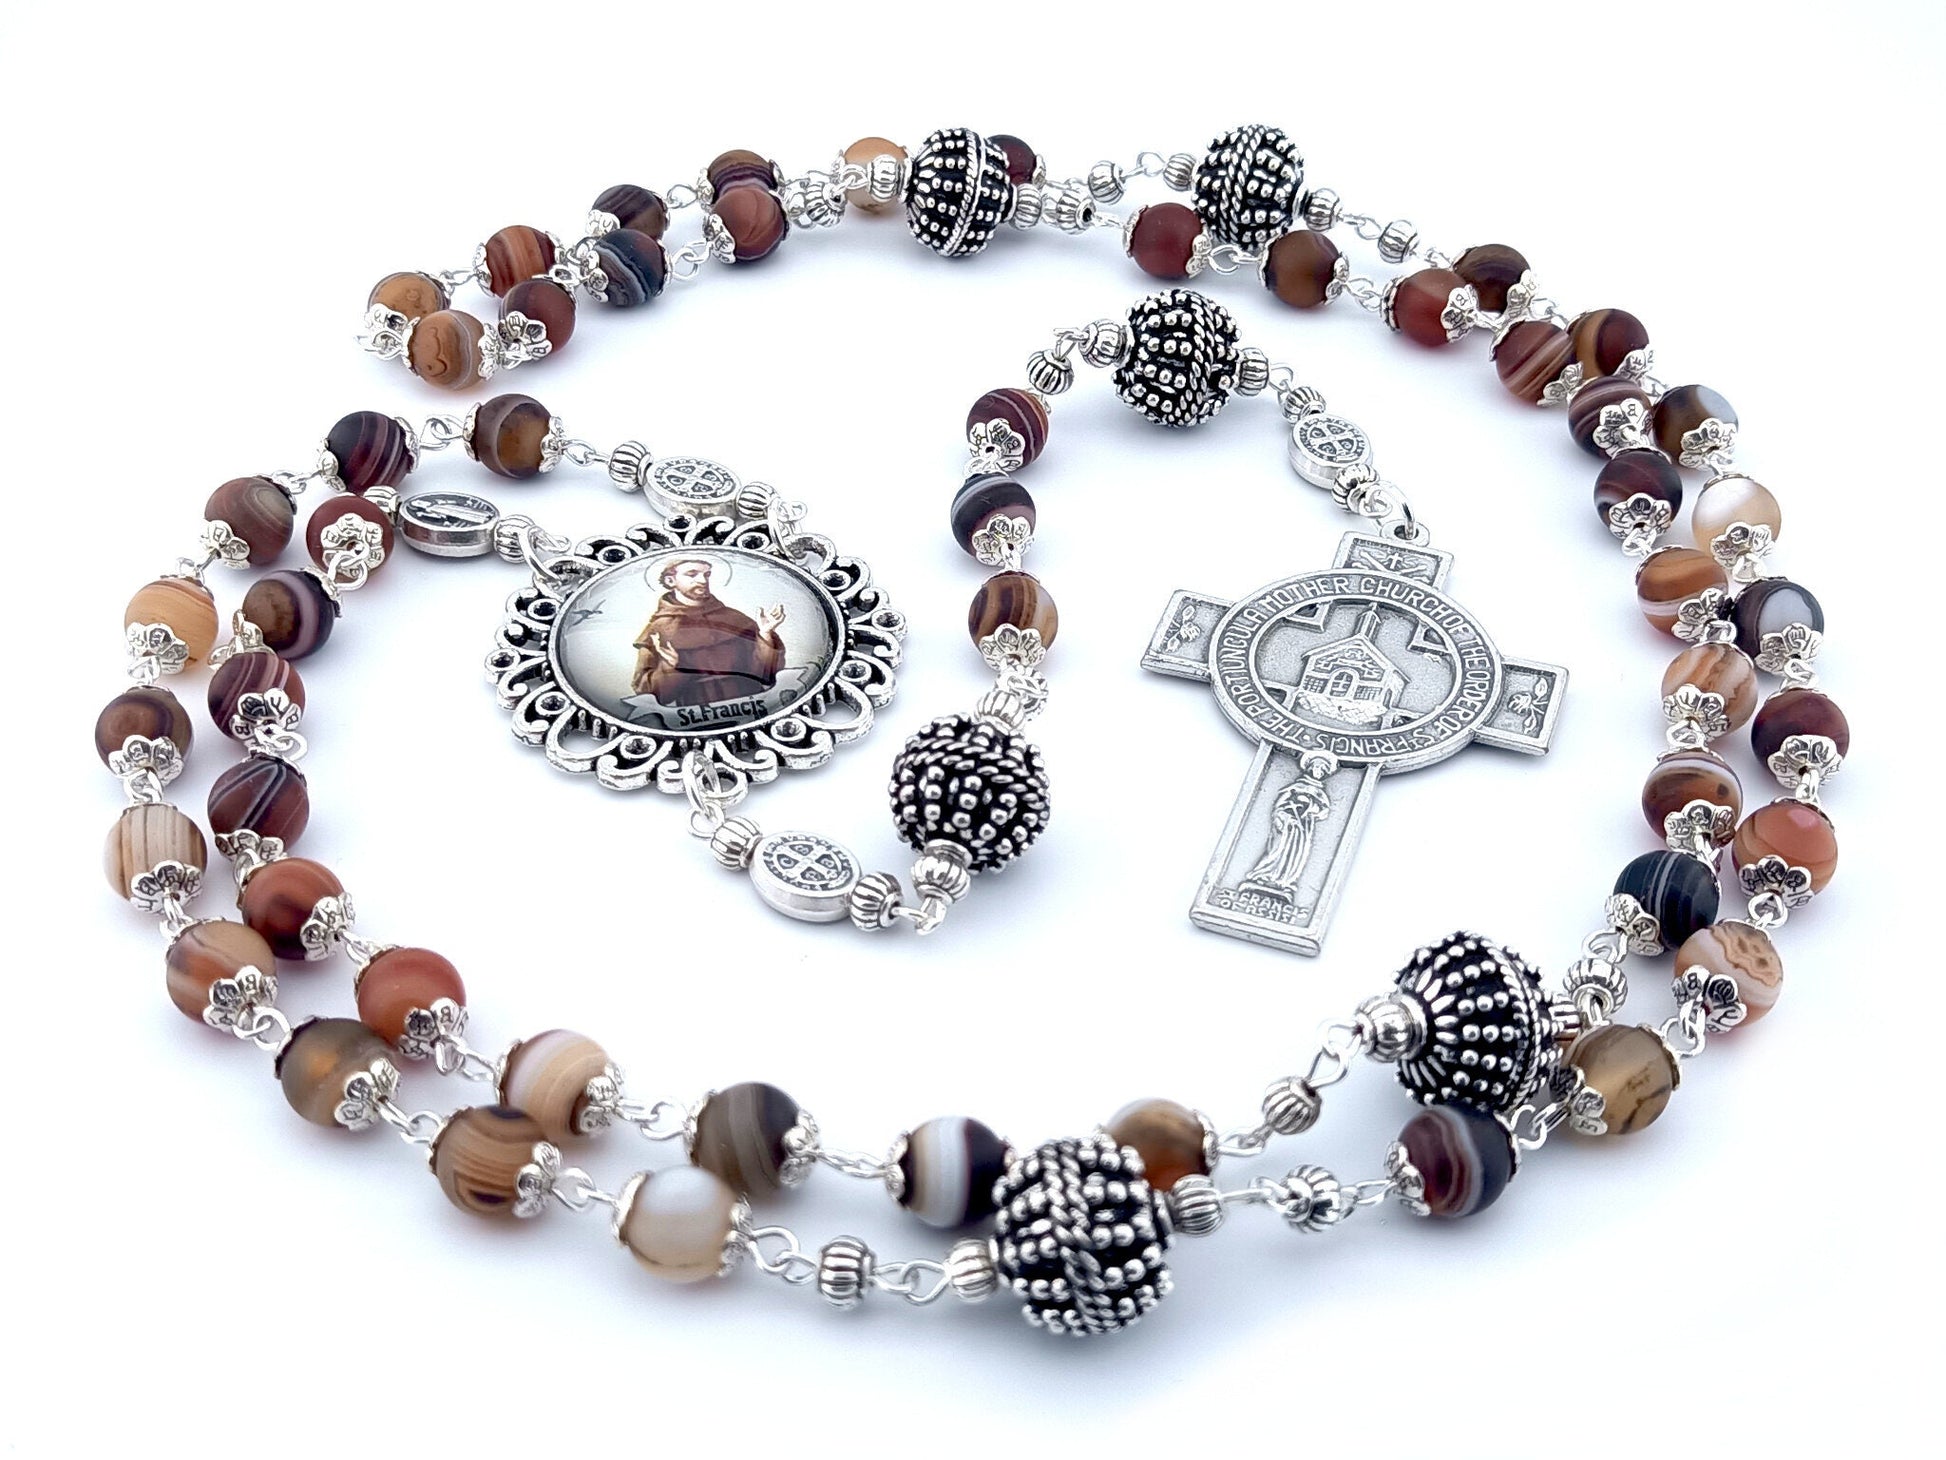 Saint Francis of Assisi unique rosary beads with brown agate gemstone beads, silver pater beads, Portiuncula Mother church cross and picture centre medal.